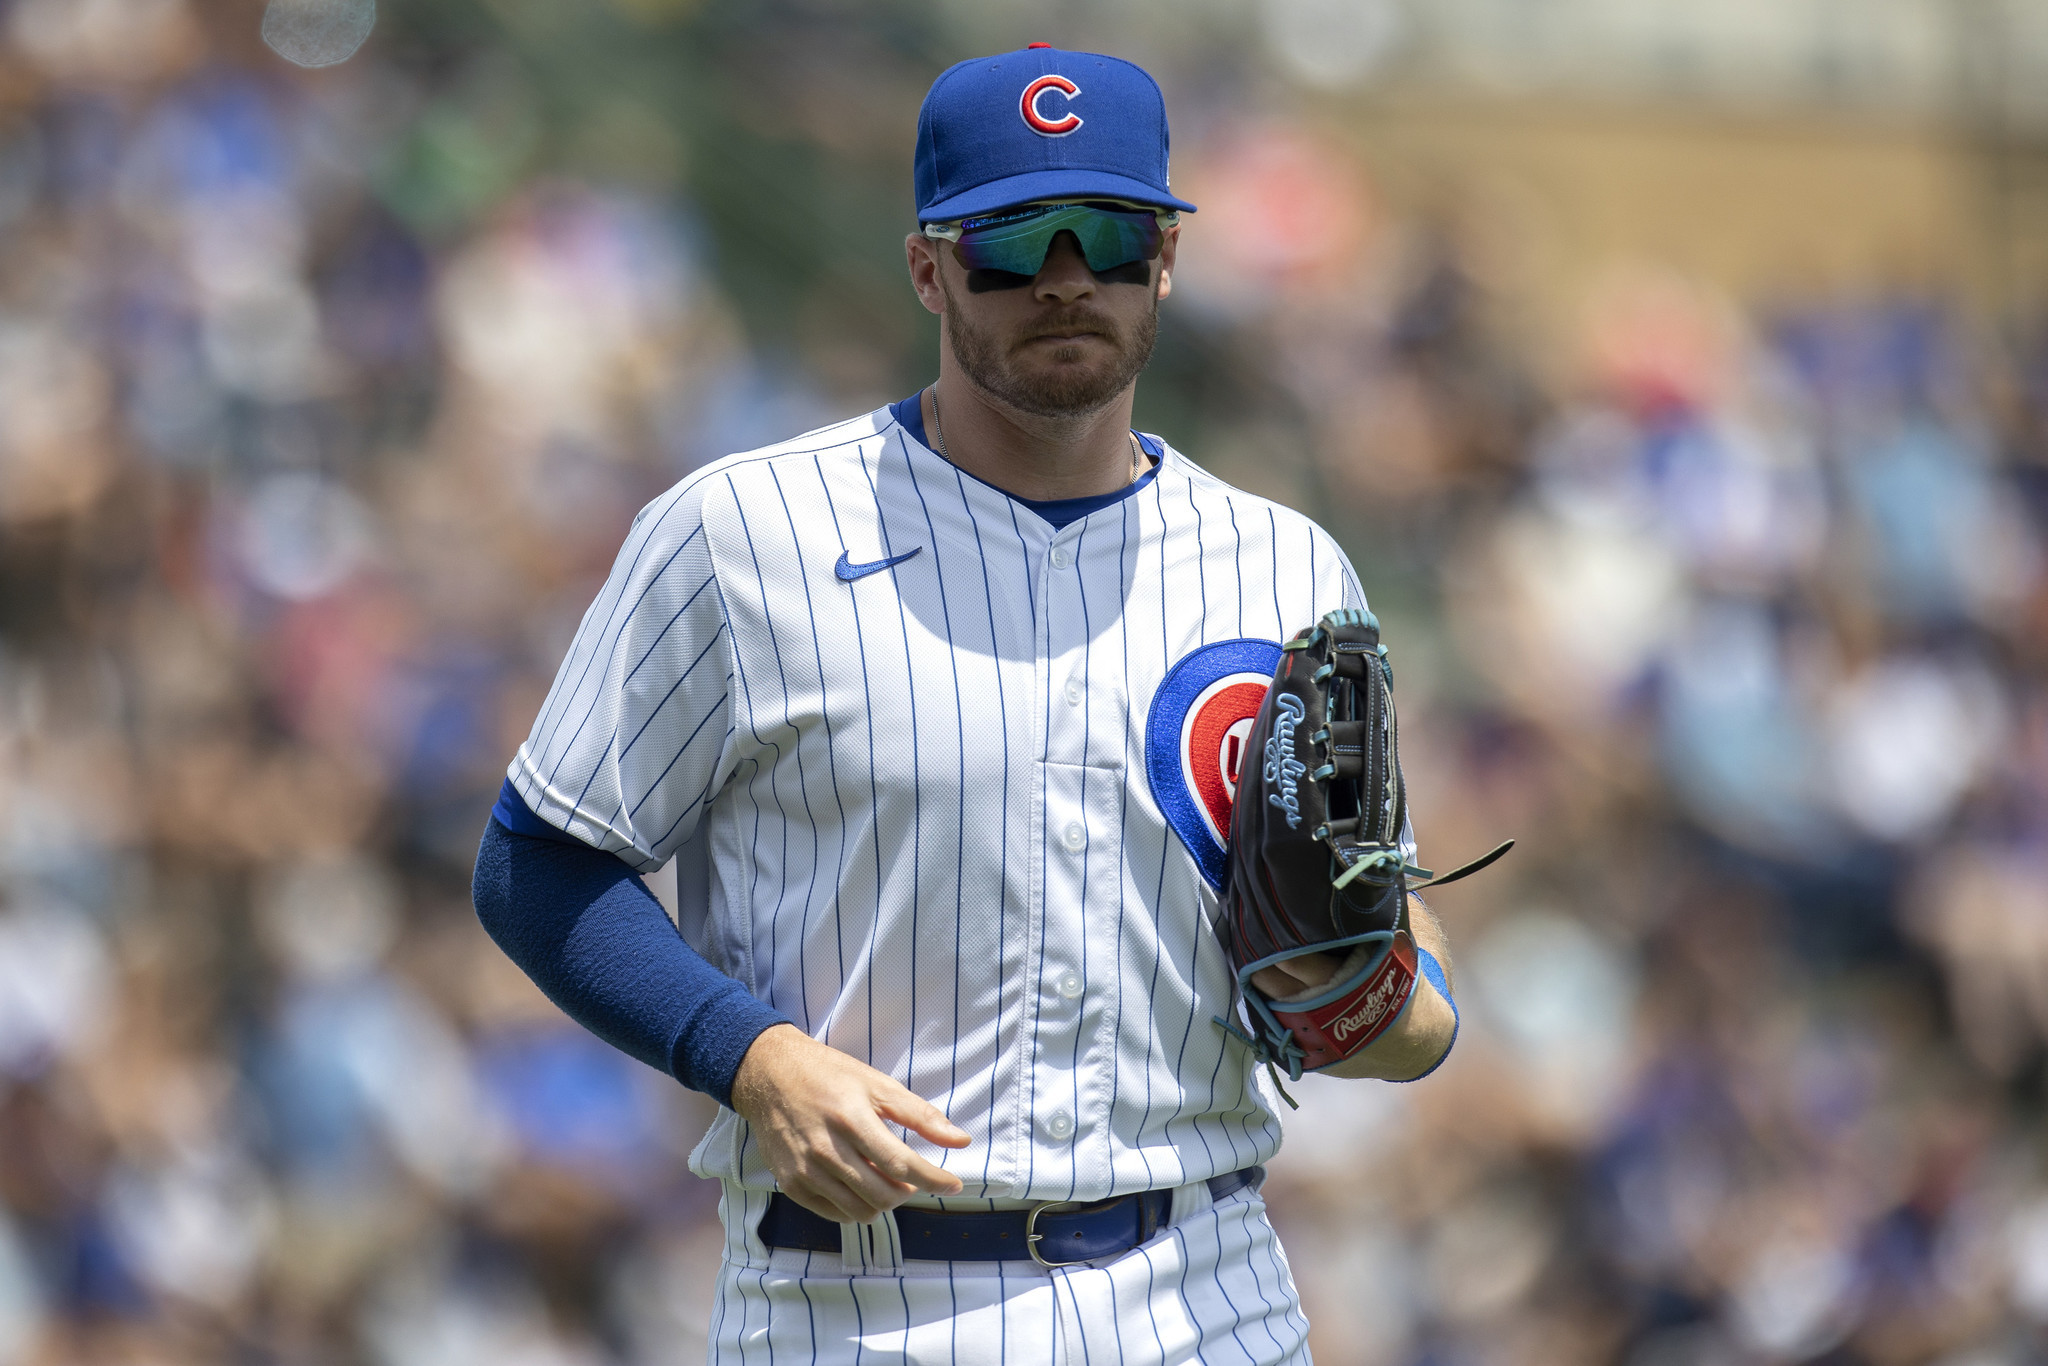 Cubs' Happ hits Cardinals catcher Contreras in head with follow-through,  then gets hit by pitch – KGET 17